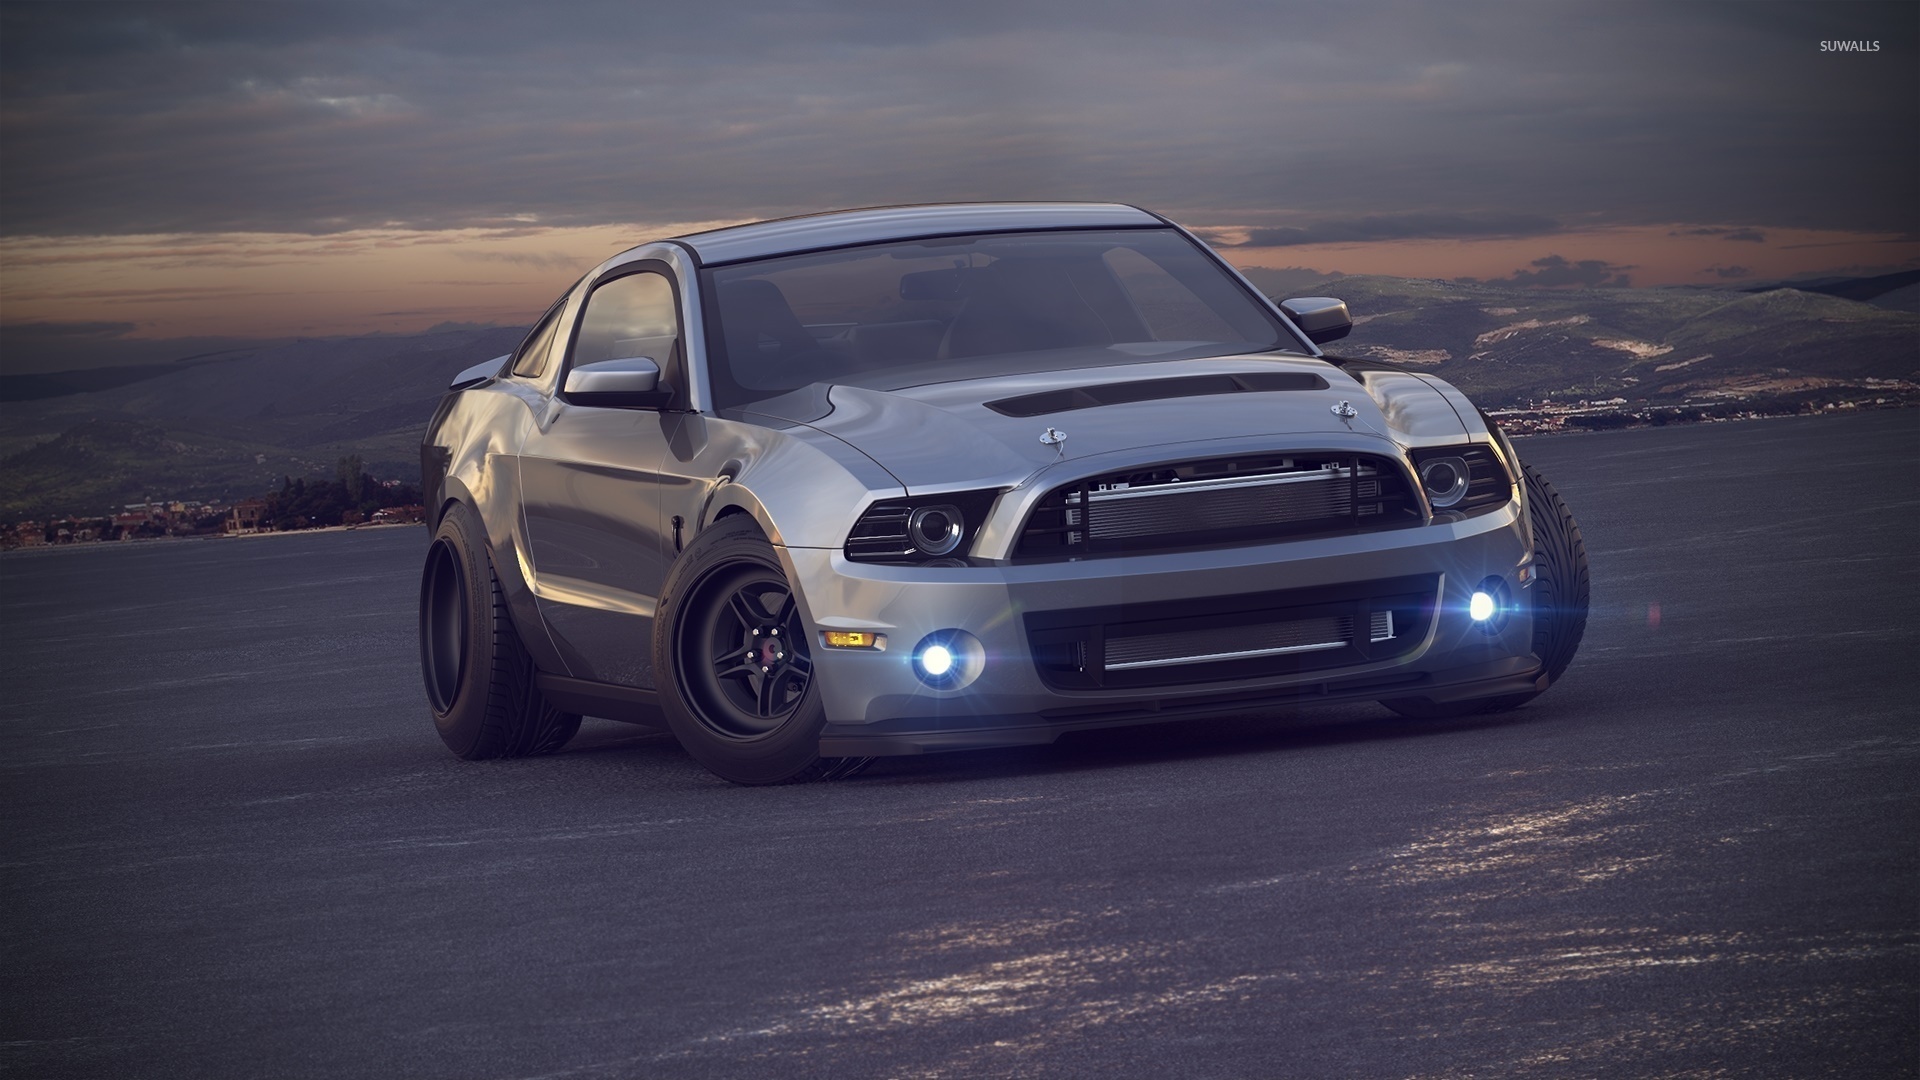 Ford Mustang Shelby Wallpaper - 05 Mustang Gt , HD Wallpaper & Backgrounds